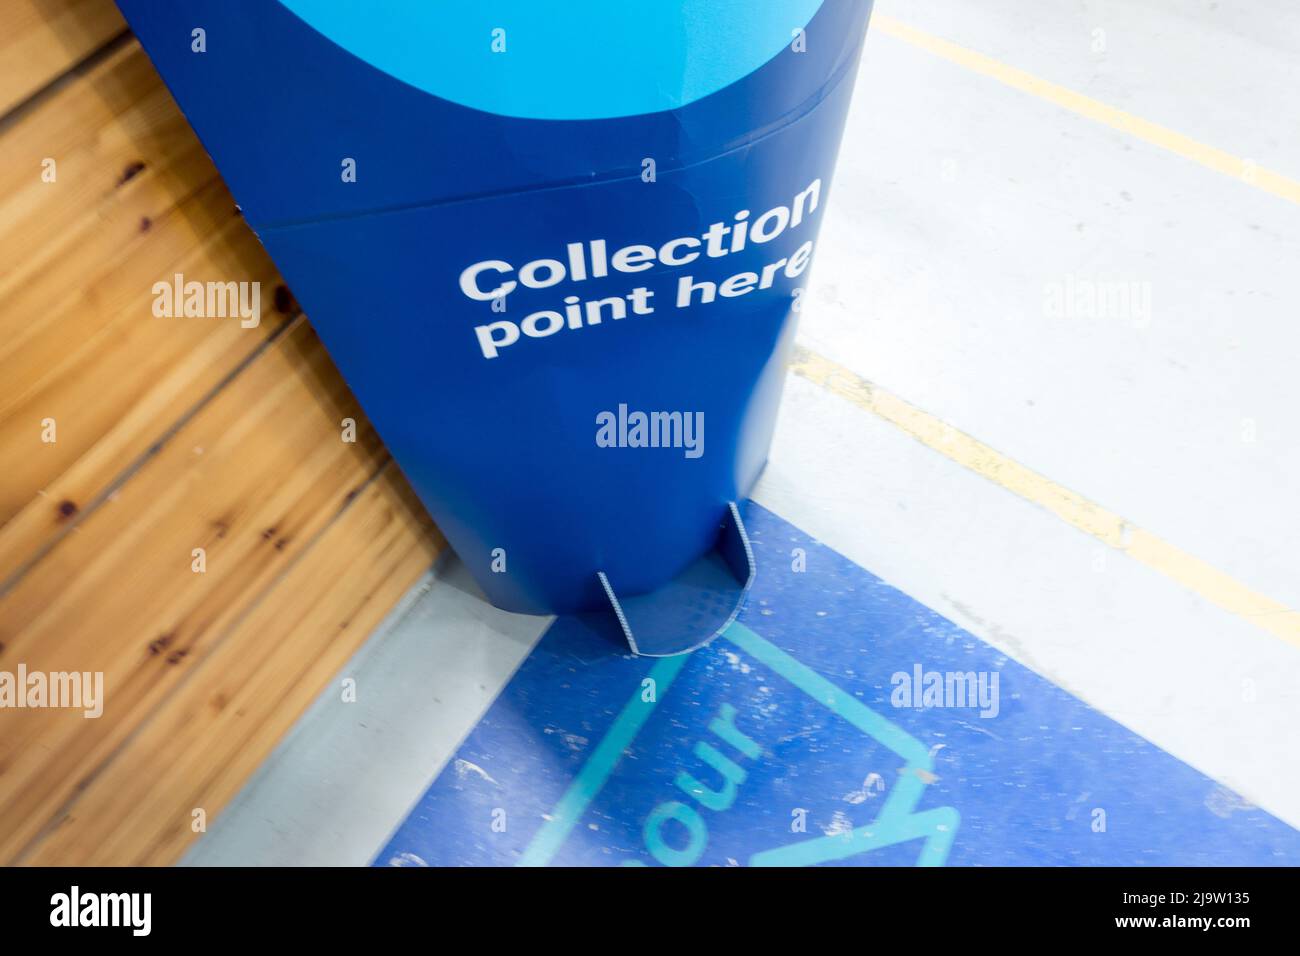 Collection point till in Wickes store Stock Photo